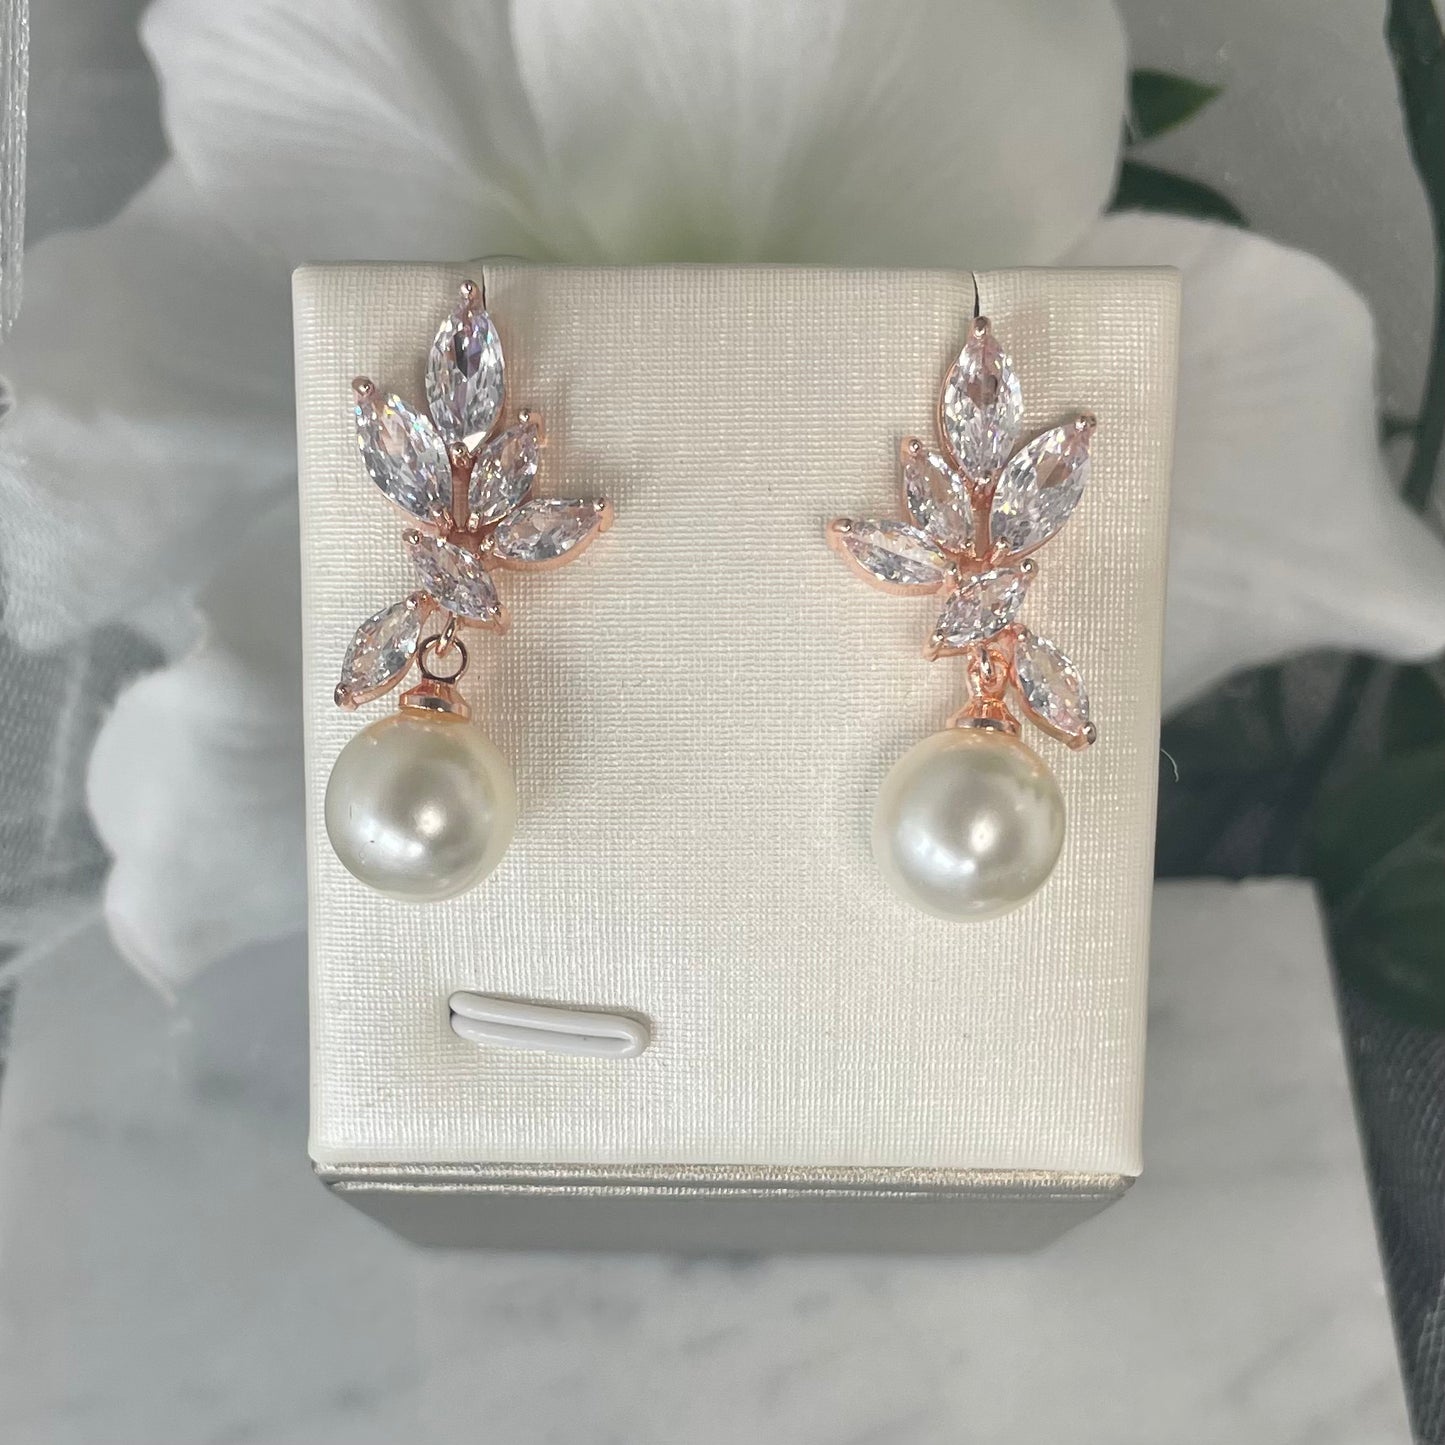 Celeste earrings with cascading leaf-like crystals and a central pearl in rose gold & silver.